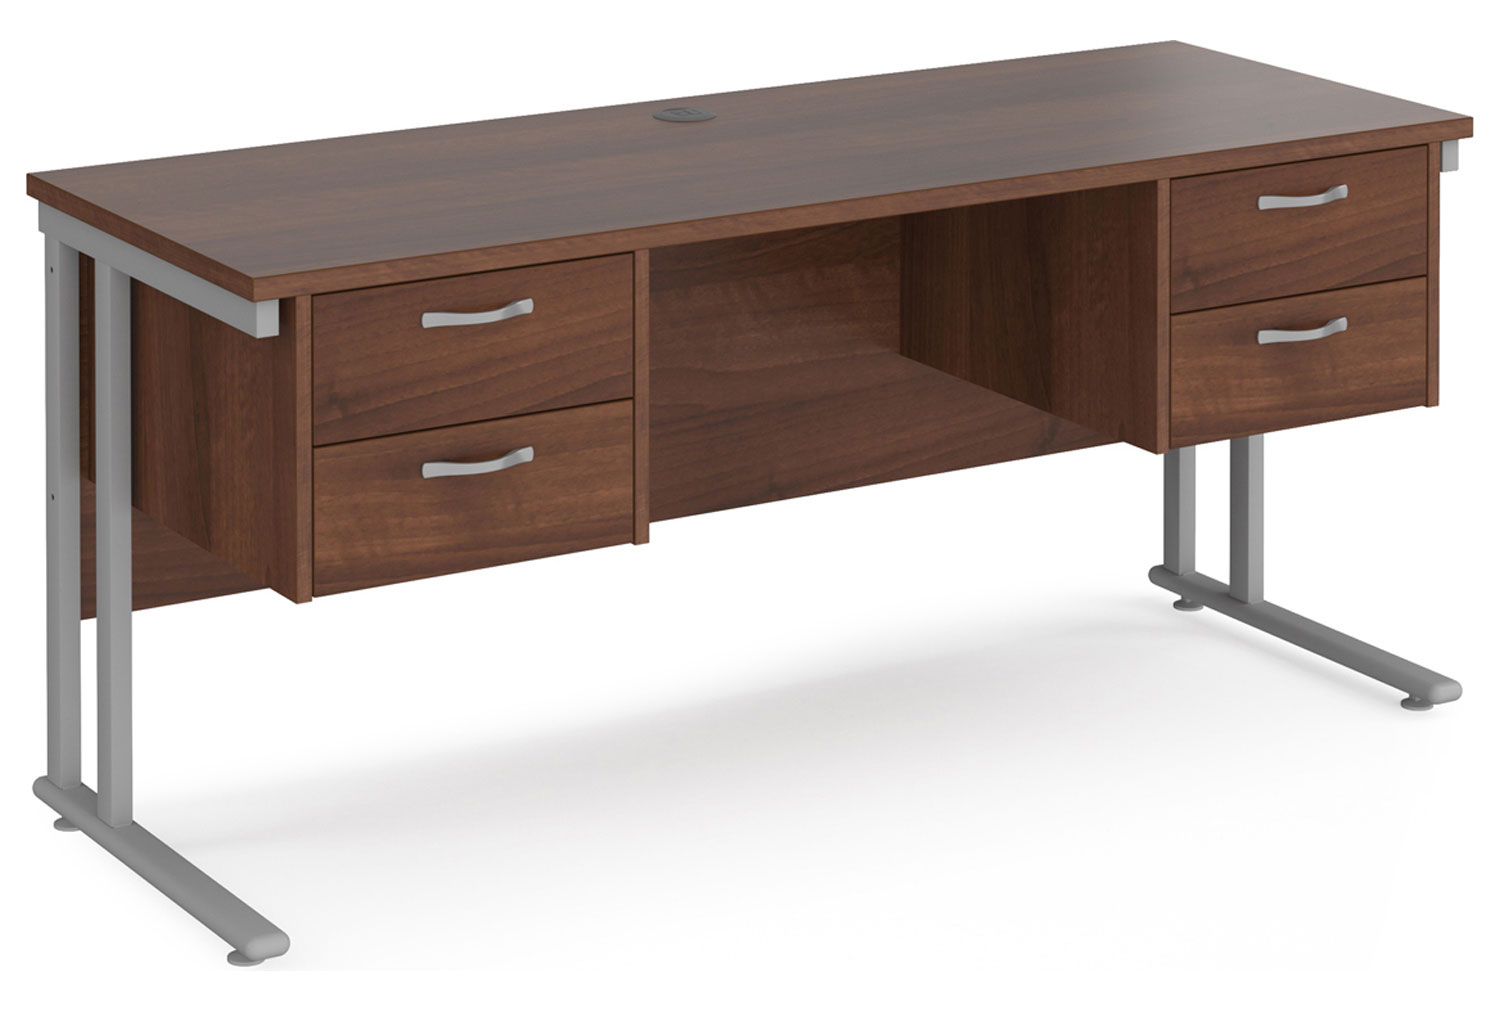 Value Line Deluxe C-Leg Narrow Rectangular Office Desk 2+2 Drawers (Silver Legs), 160w60dx73h (cm), Walnut, Express Delivery